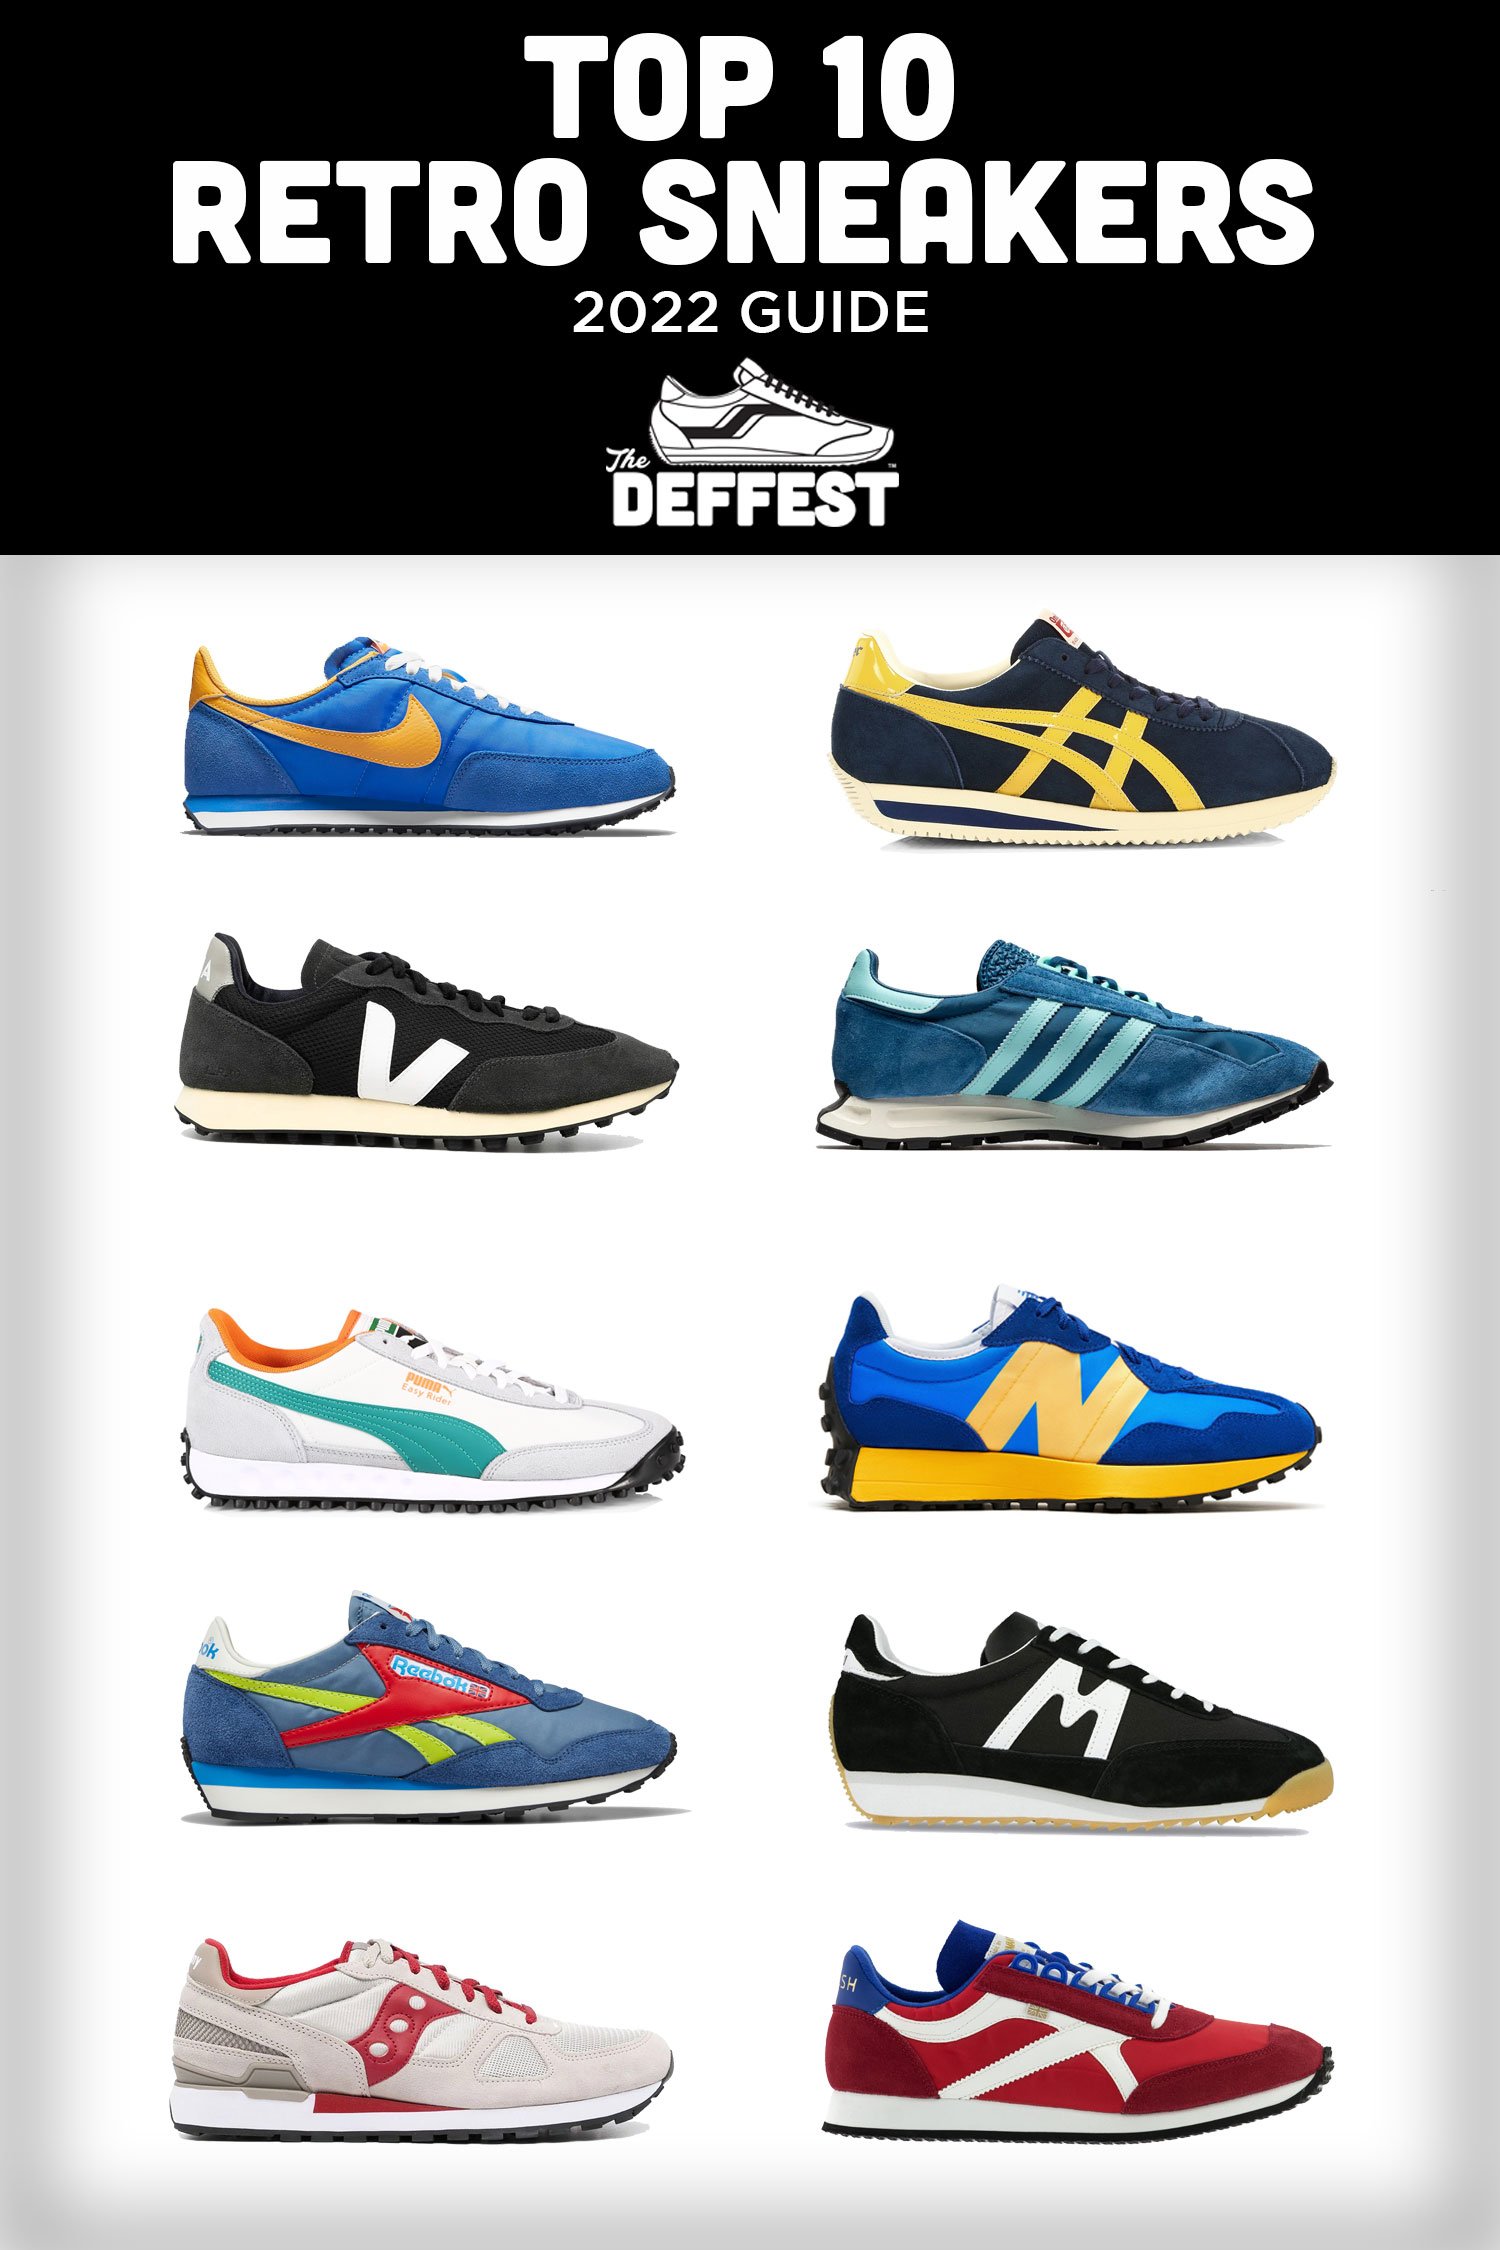 Deffest®. A vintage and retro sneaker blog. — Top men's retro sneakers out now - Deffest sneaker buyer's guide